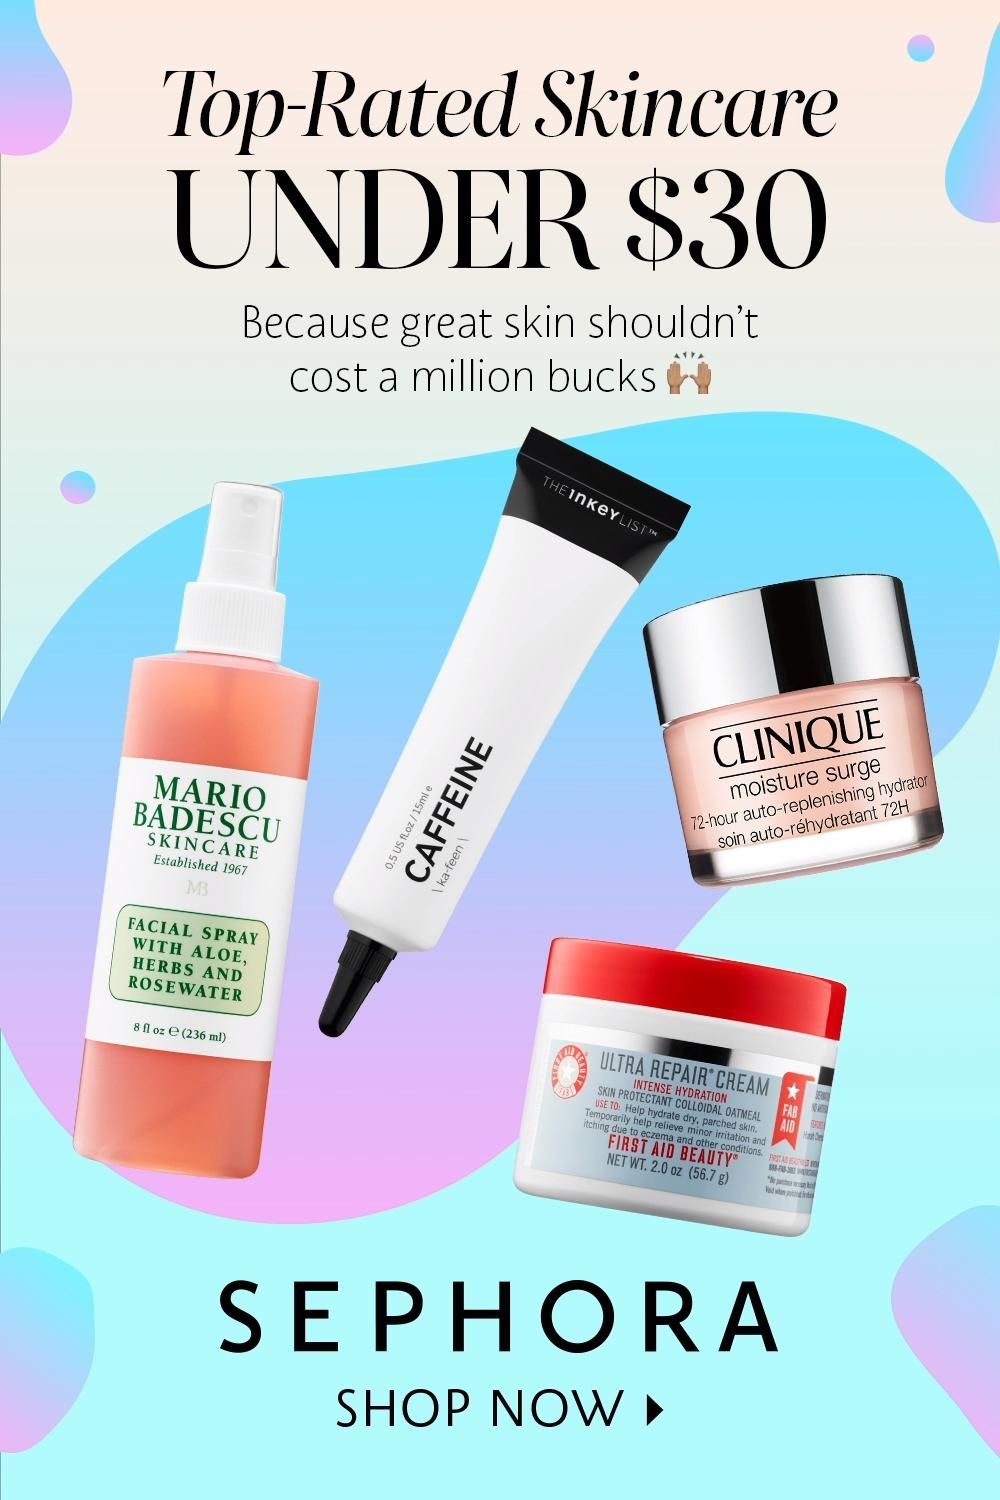 Top-Rated Skincare Under $30 - Top-Rated Skincare Under $30 -   19 top beauty Products ideas